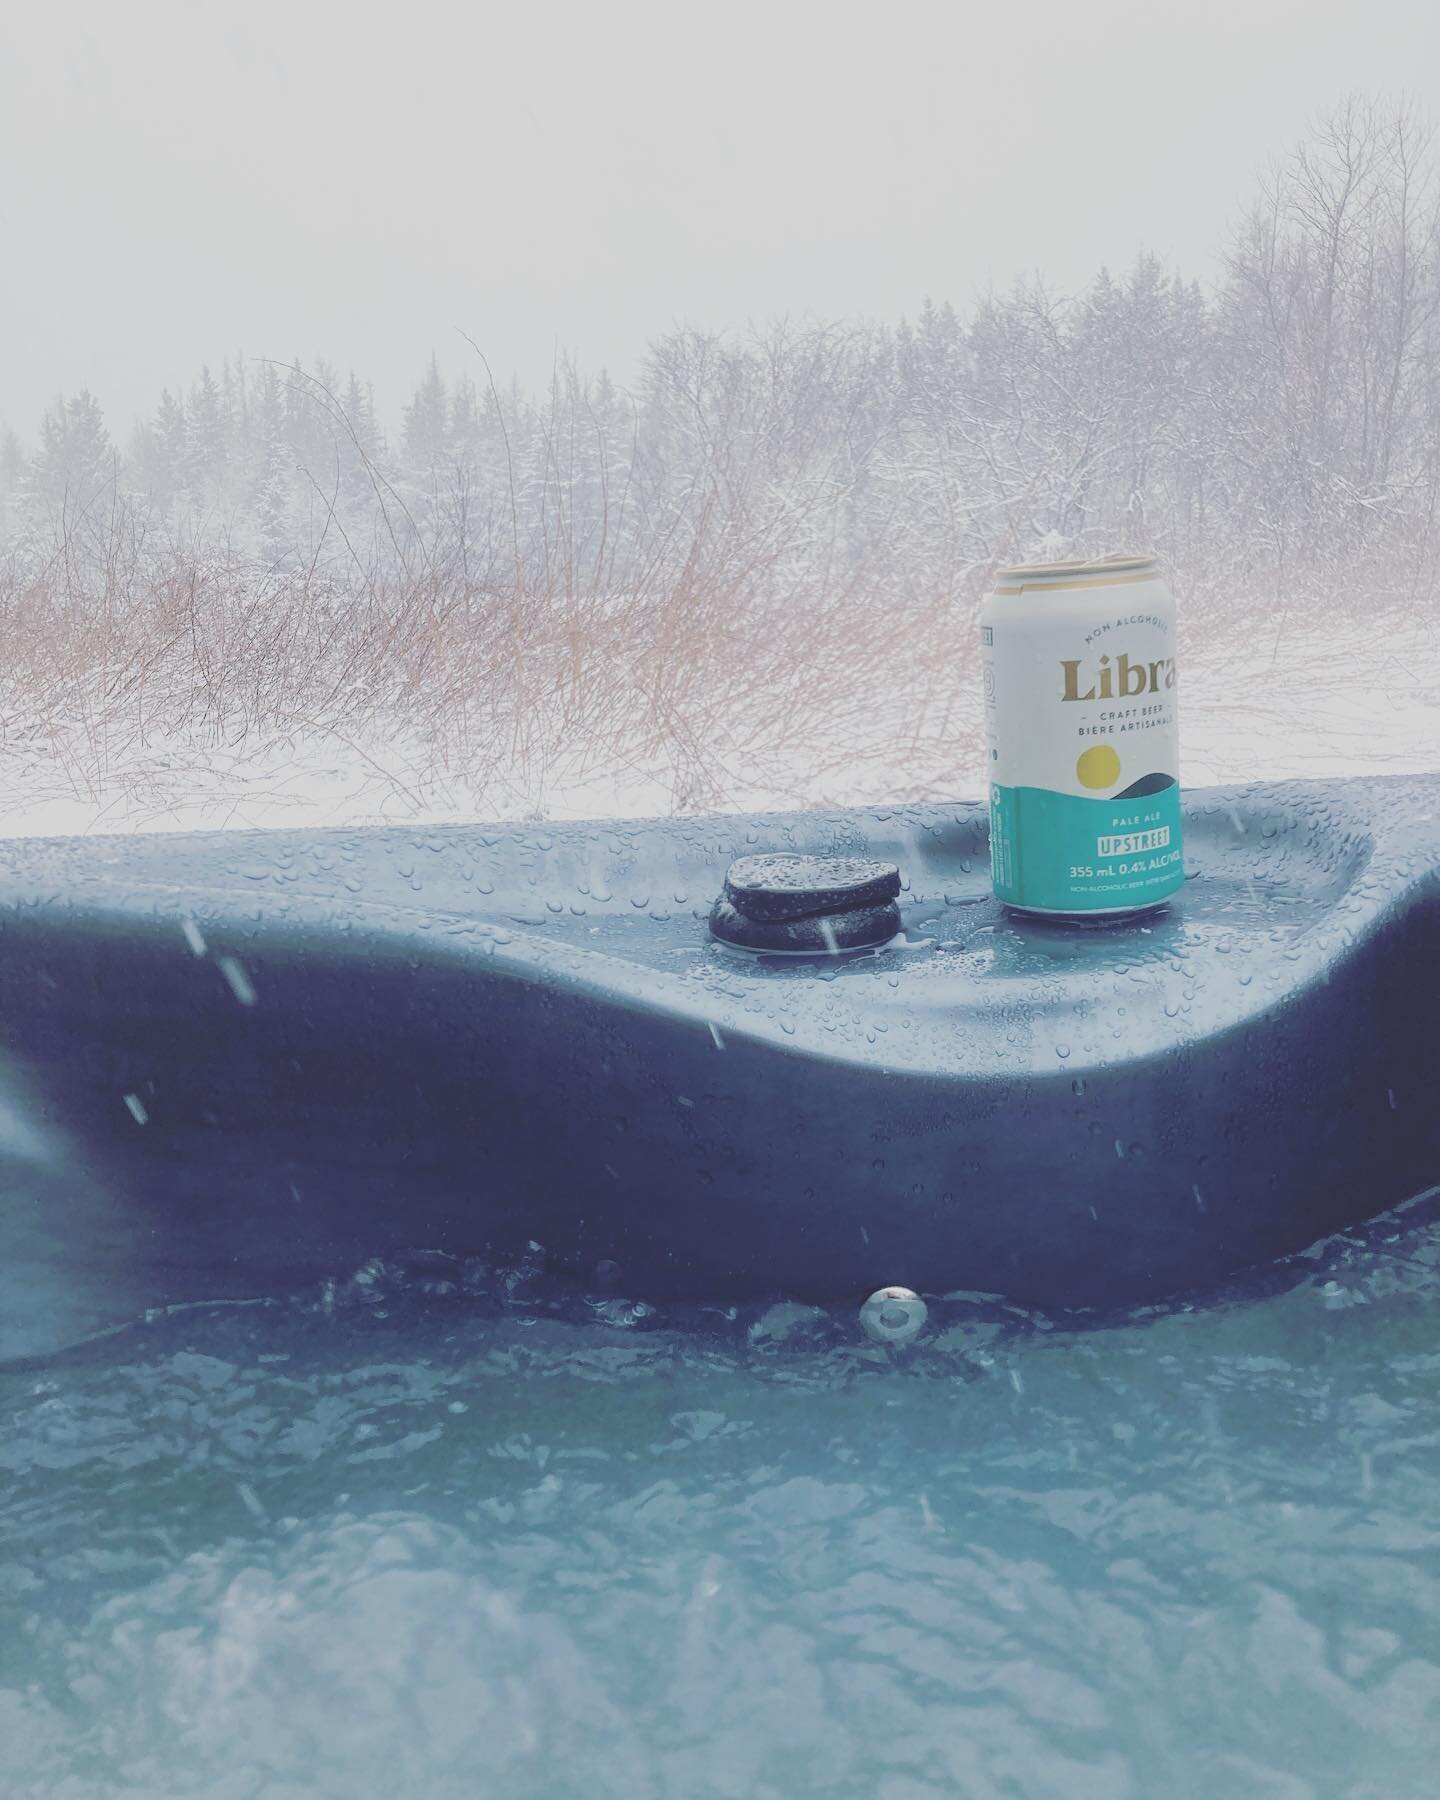 The perfect model for a hottub snow day 🥶😶&zwj;🌫️😎❄️ @drinklibra #supportlocal